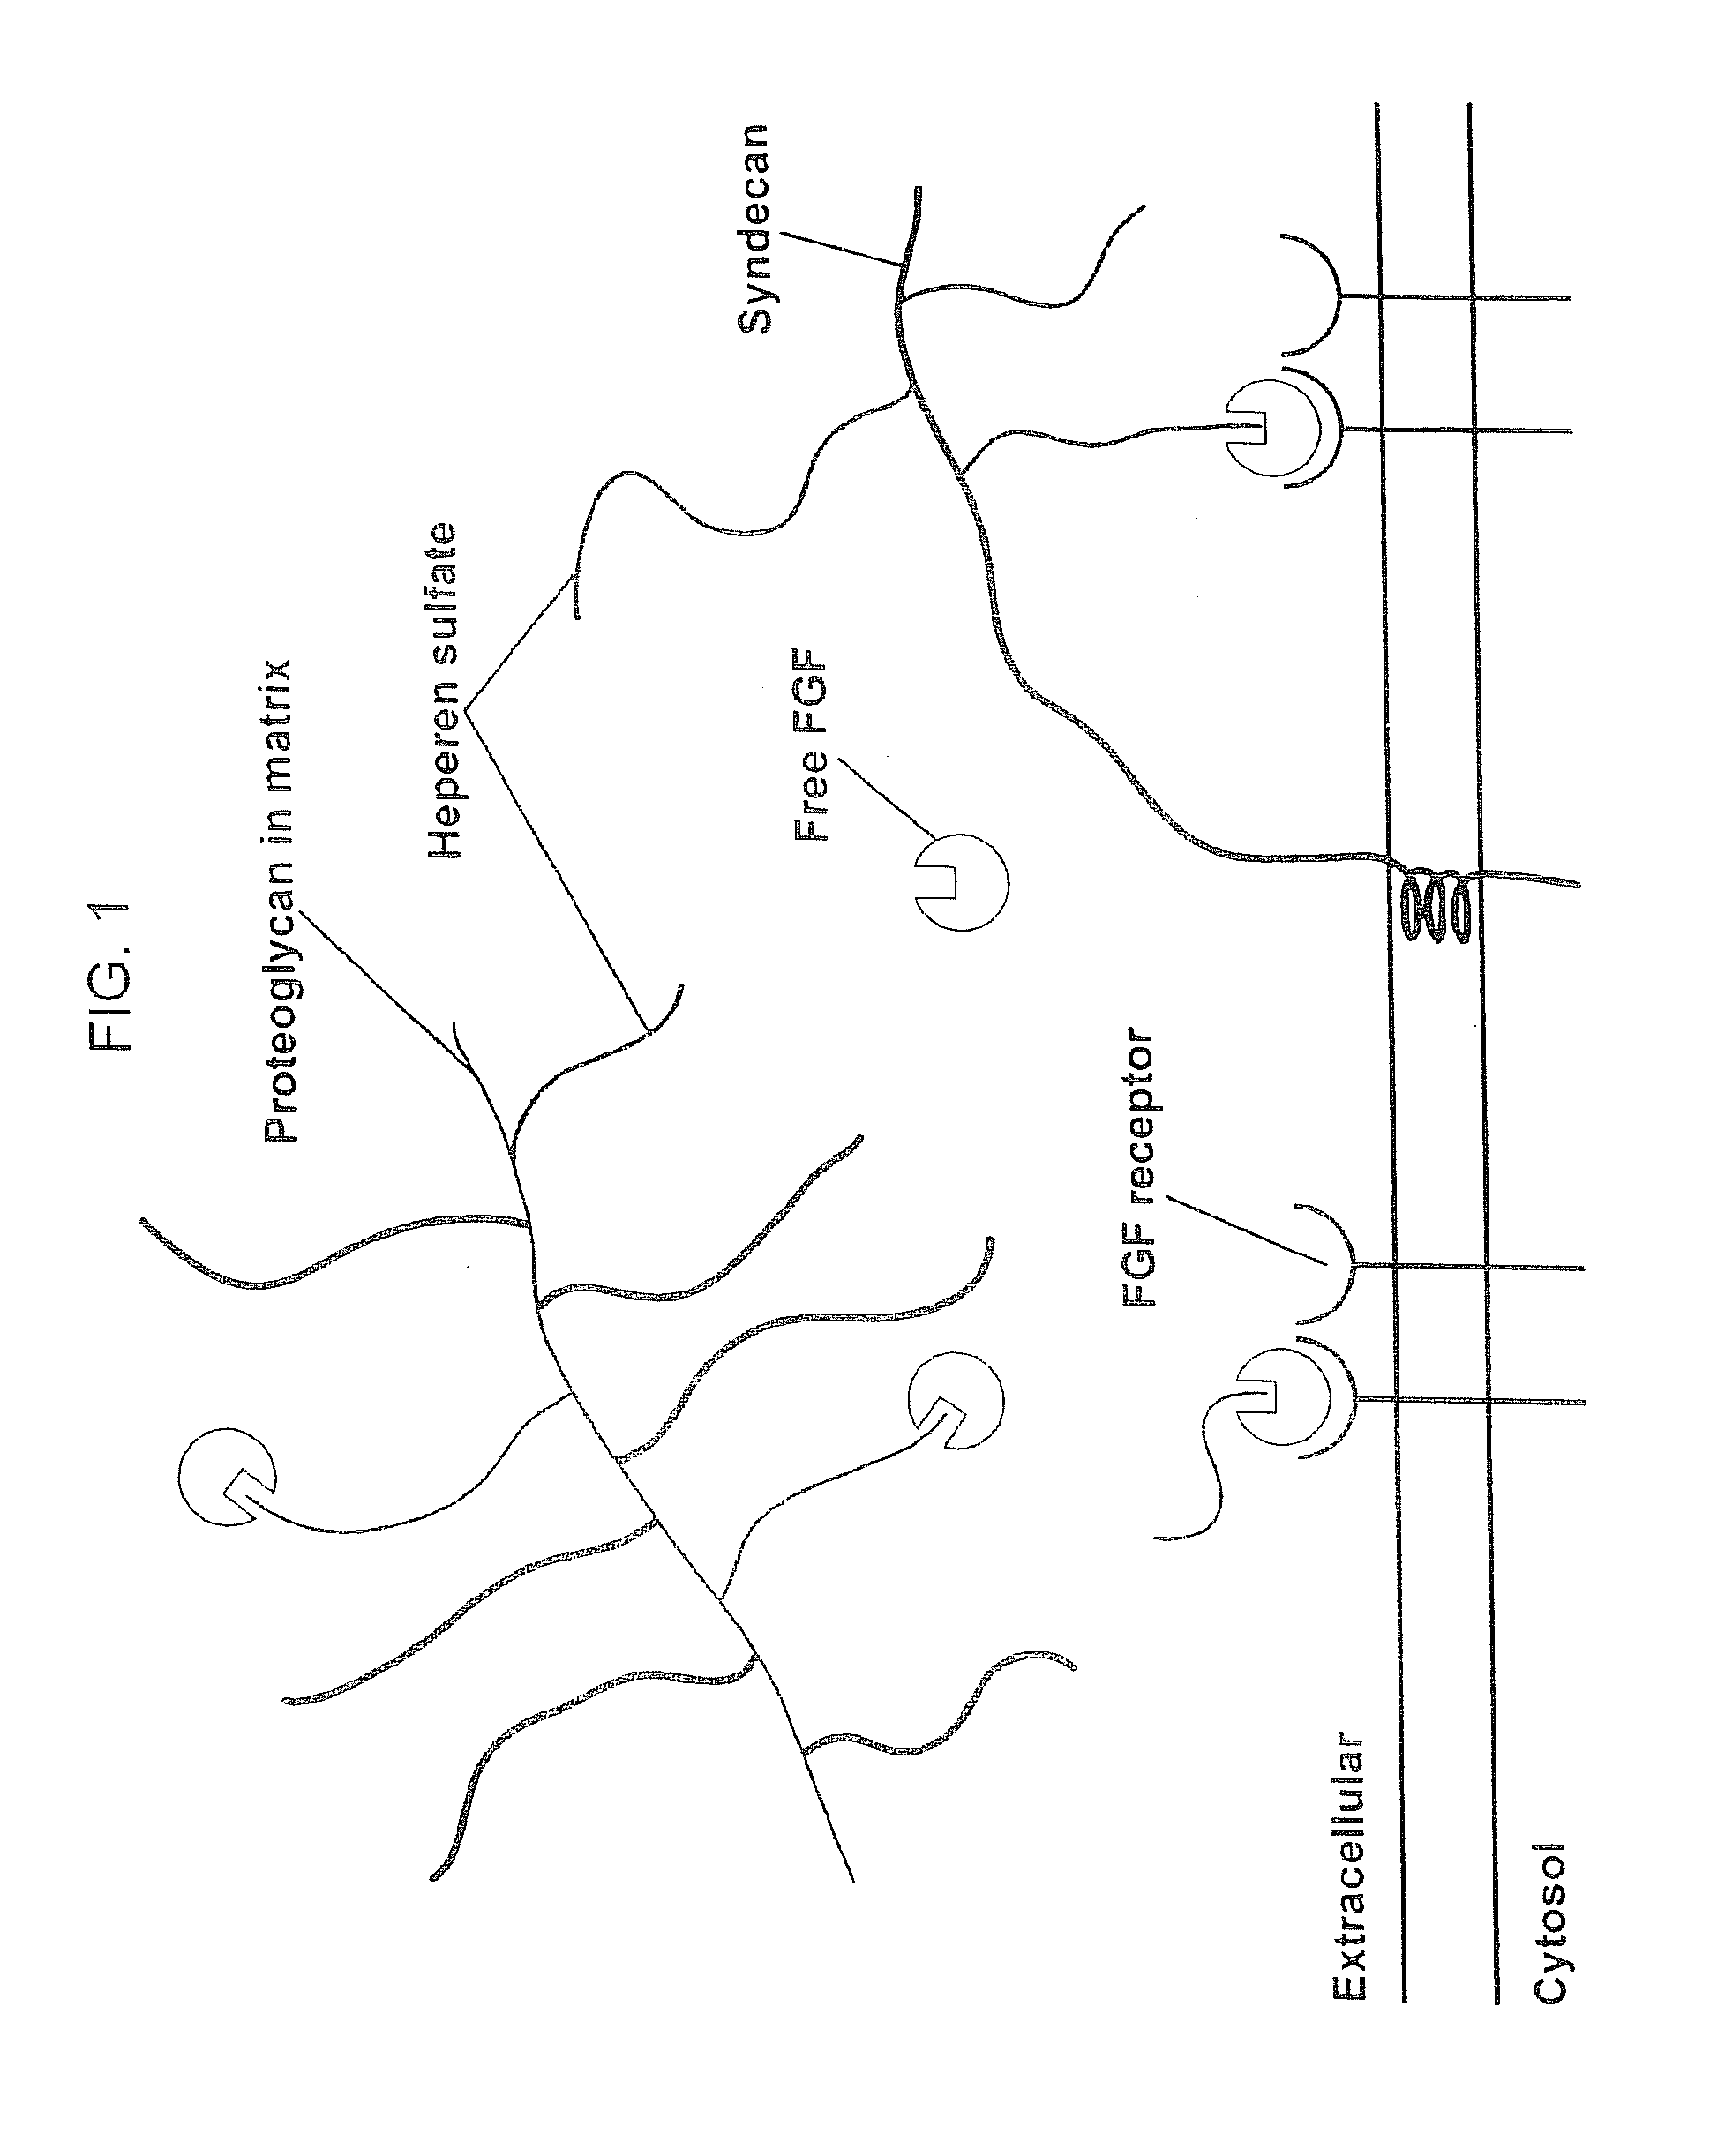 Compositions for Regenerating Defective or Absent Myocardium